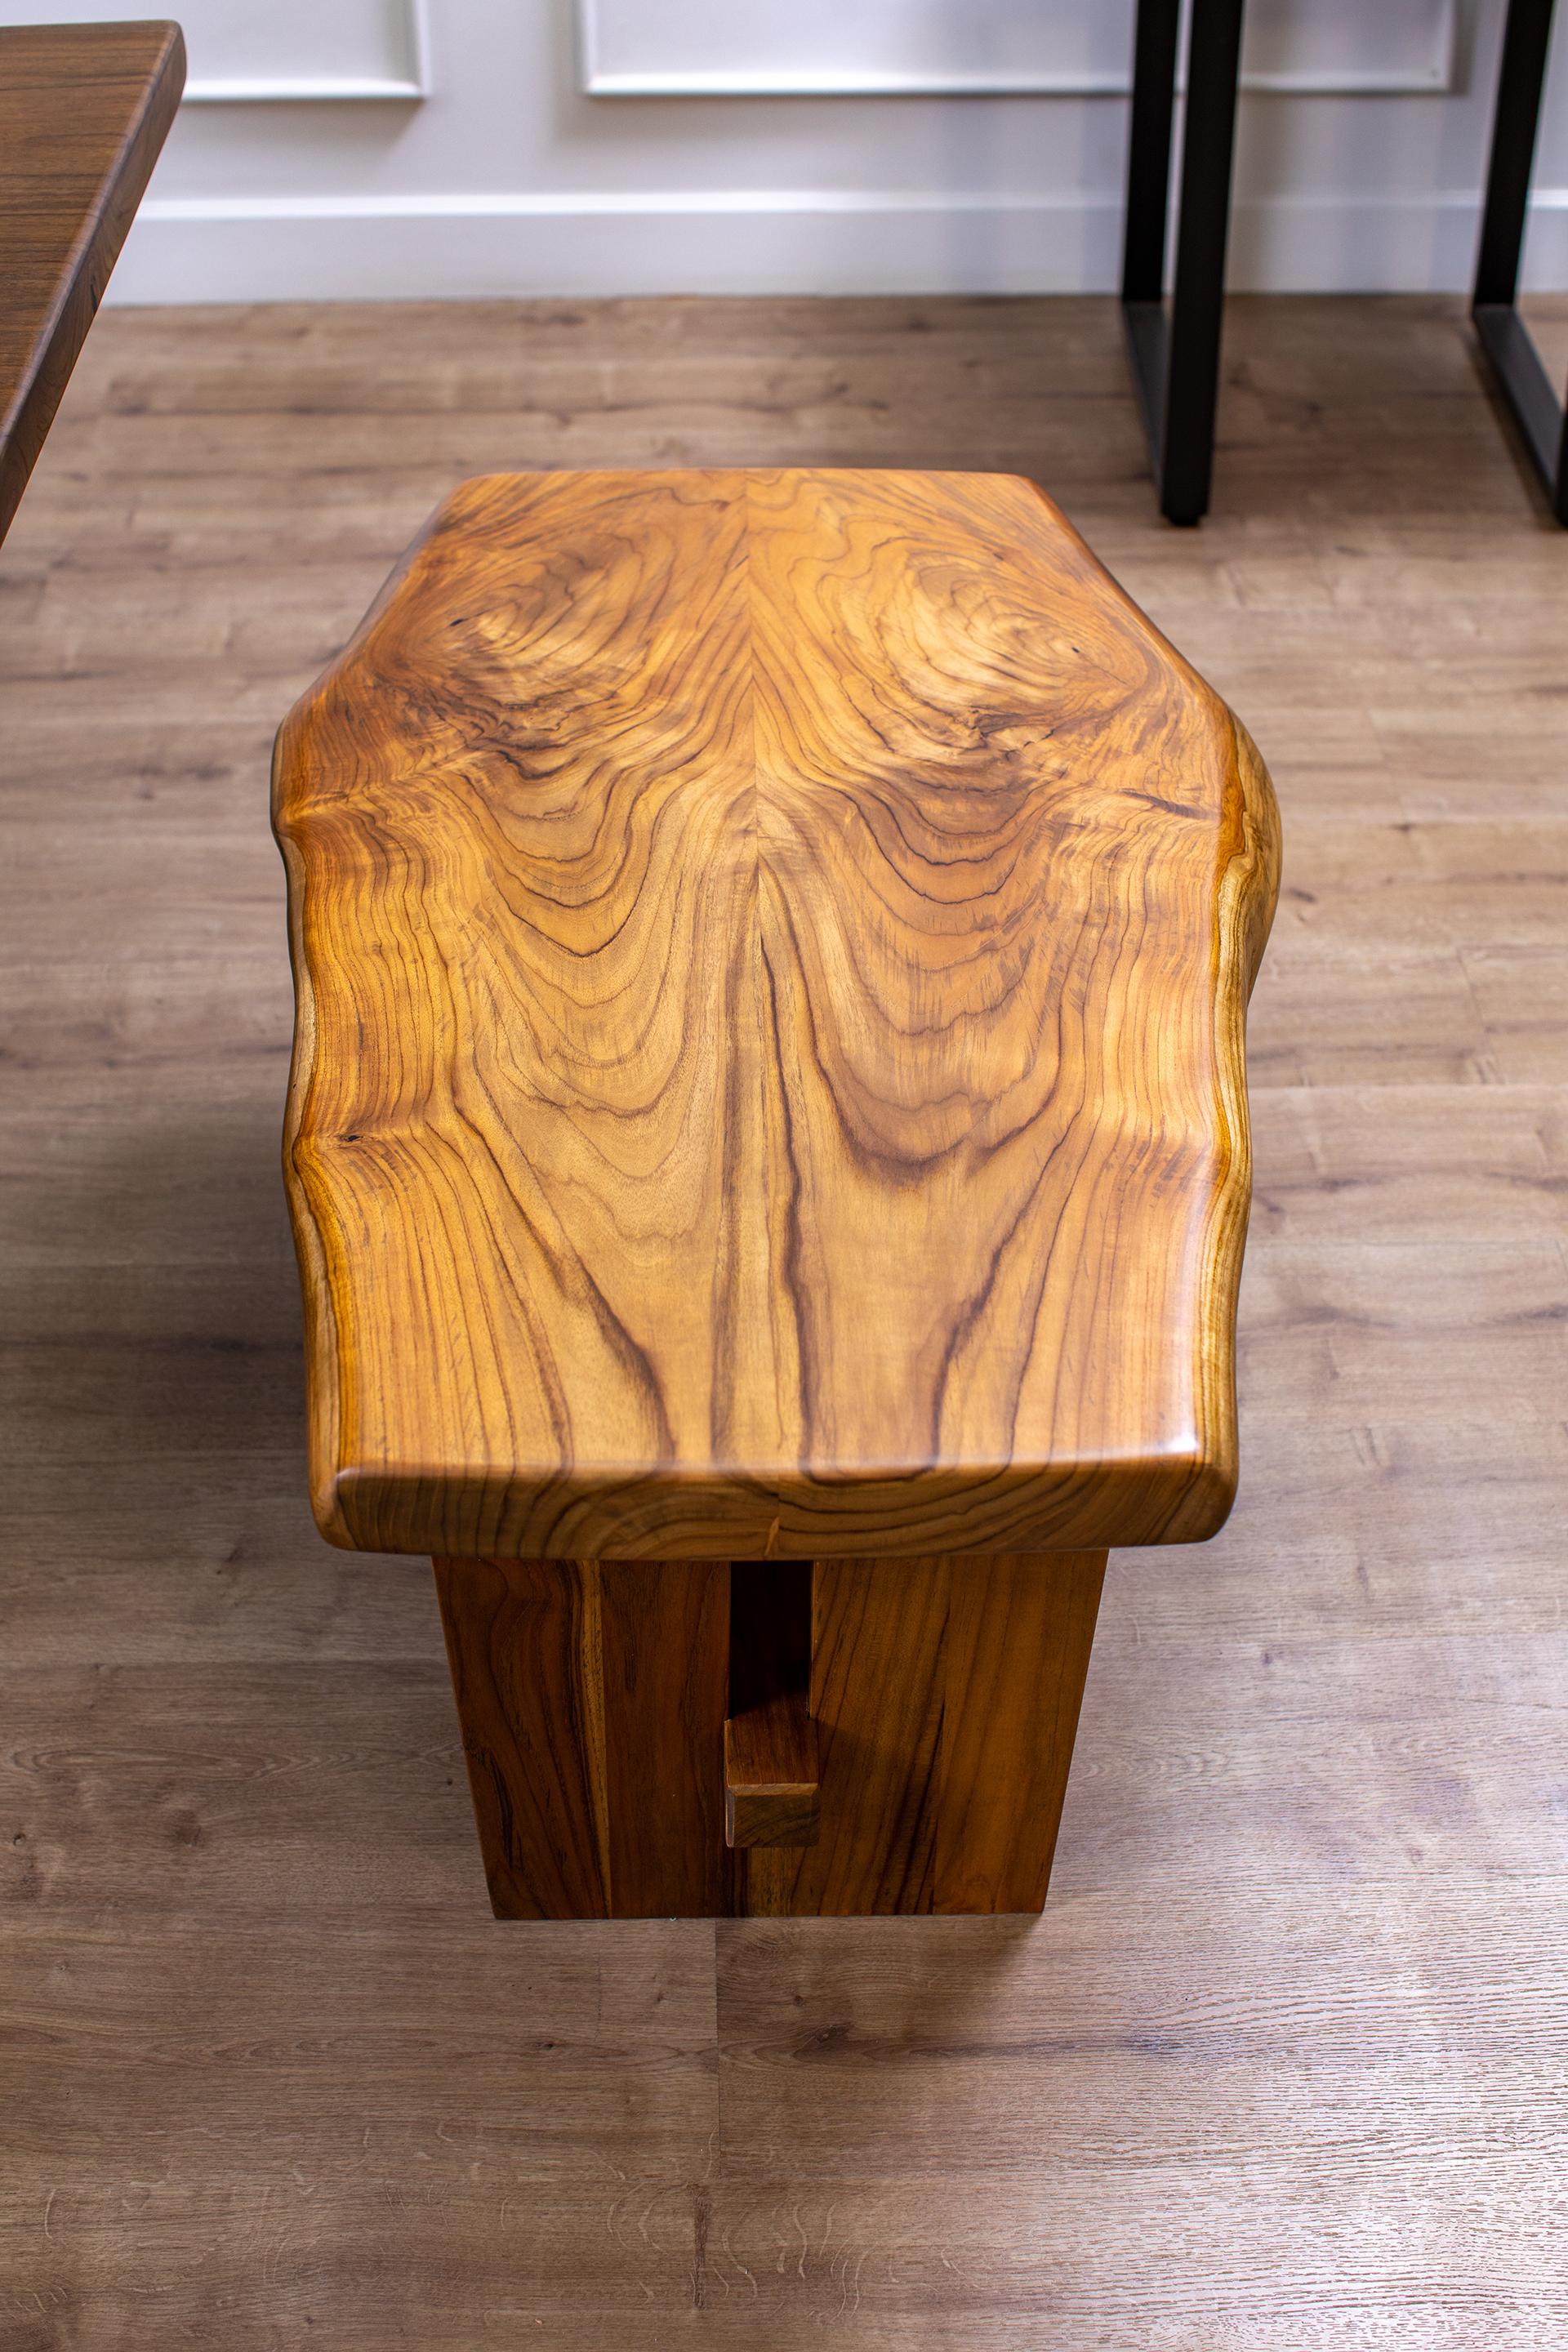 A one-of-a-kind piece, this book-matched solid teak bench is a stunning addition to any home. Two 2